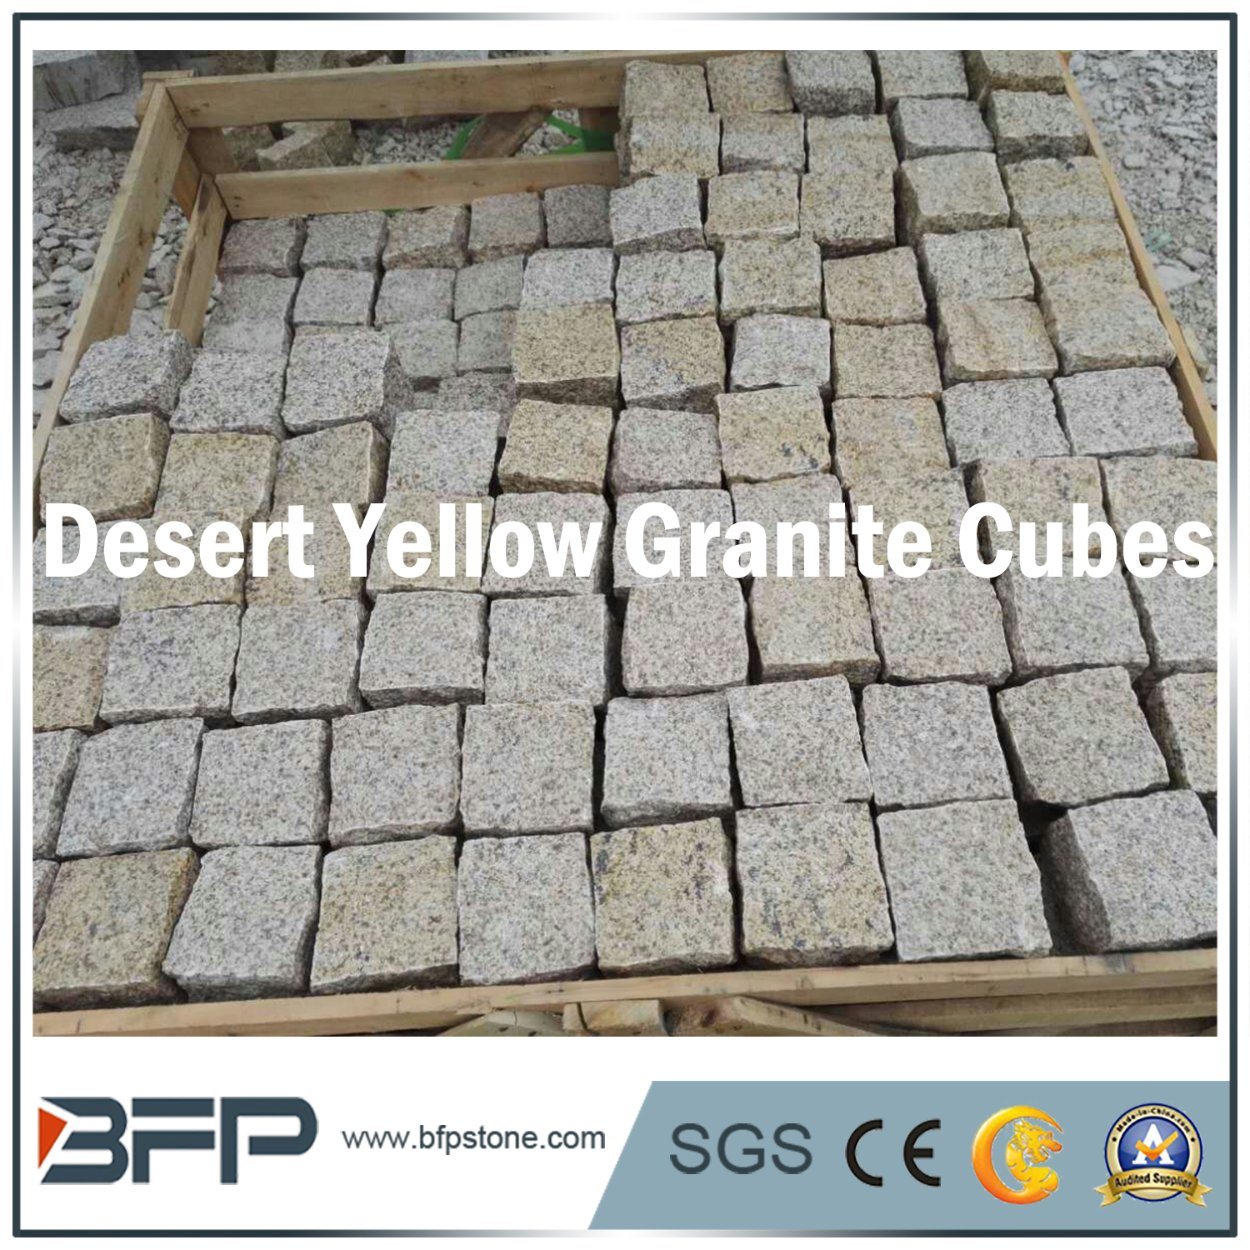 Desert Yellow Granite Cubes/Paver/Kerbstone for Projects, Road, Garage